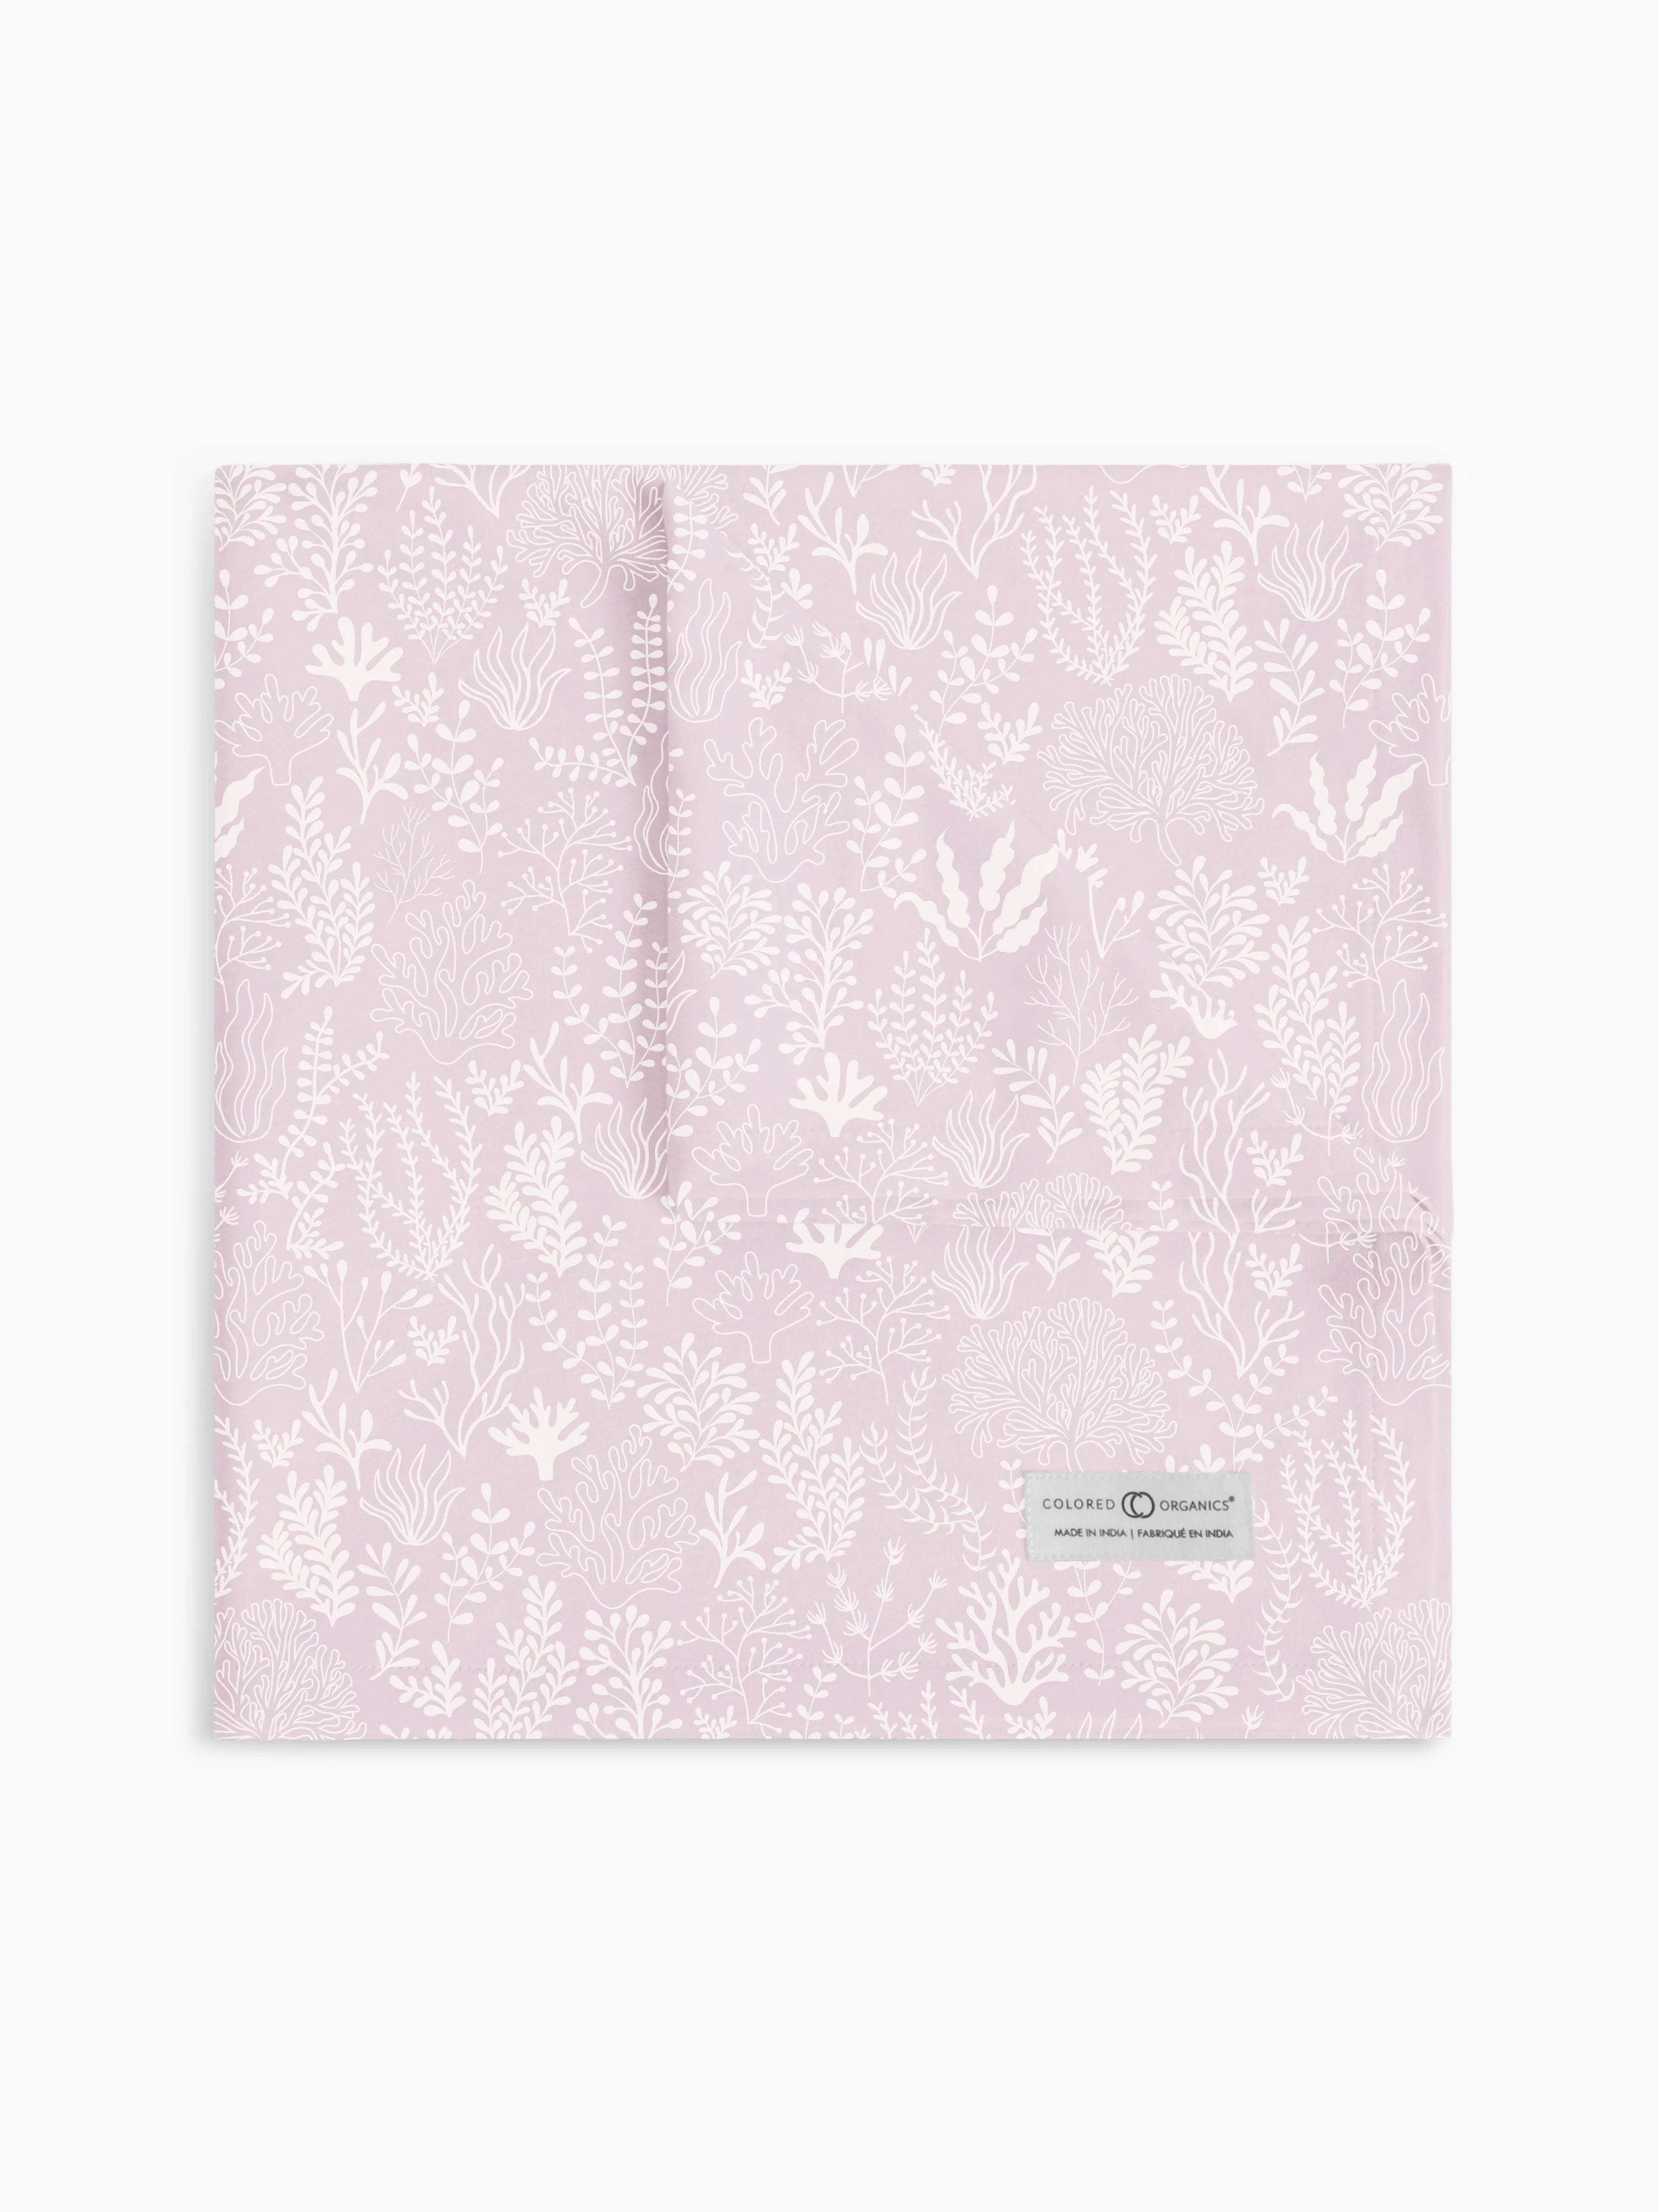 Colored Organics swaddle blanket in 'Coral Reef - Wisteria' design, beautifully laid out to display a detailed coral pattern in a delicate wisteria purple hue, featuring the brand's signature organic label